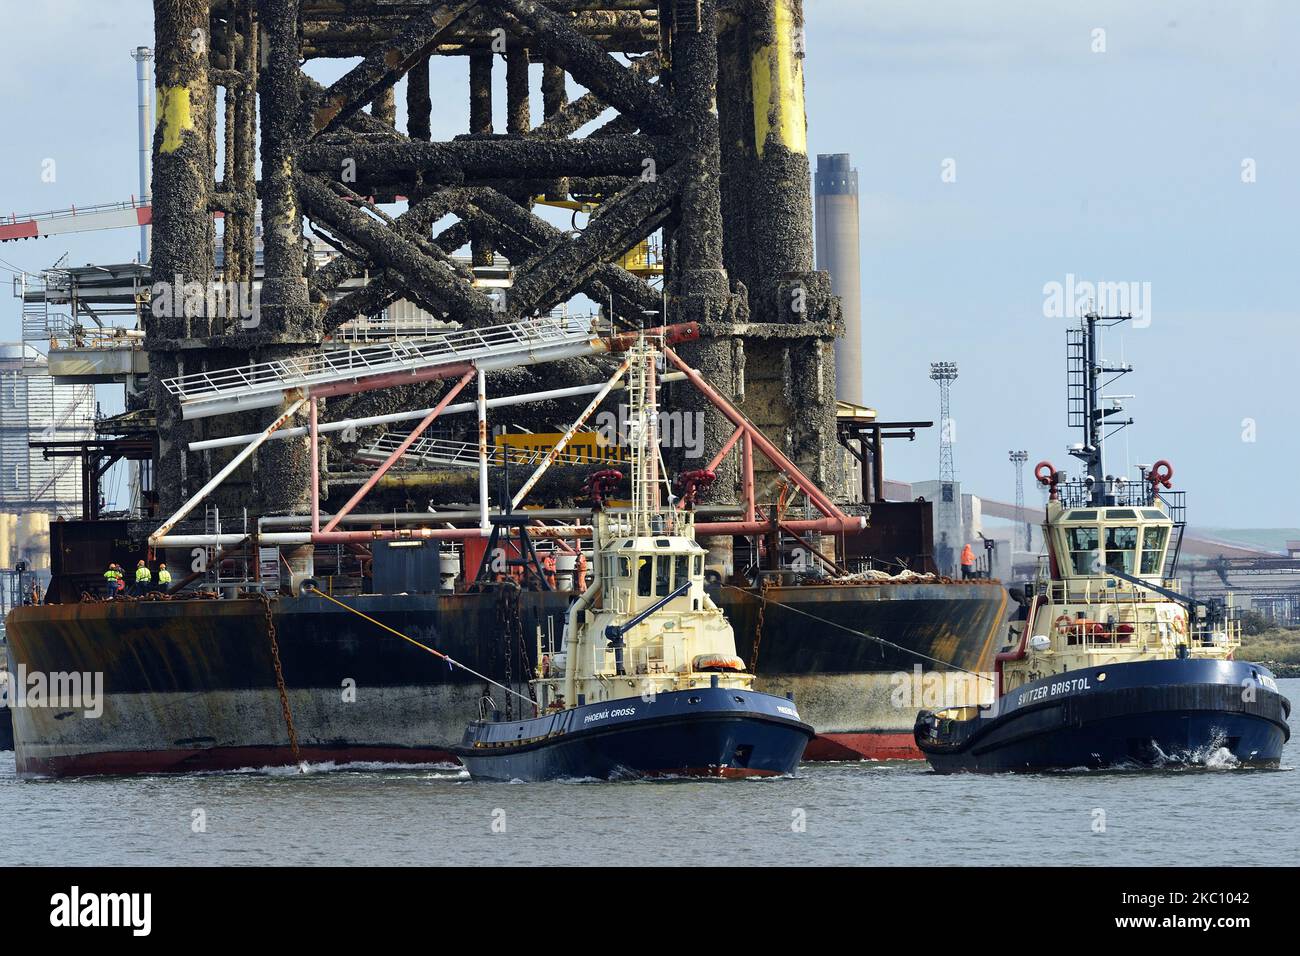 Tugs towing another module from an Oil Rig into the Able Uk yard at Greatham, Hartlepool, England on October 1, 2020 for decommissioning. The town has today been placed into a localised lockdown by the UK Government in response to an exponential rise COVID-19 cases. (Photo by Tom Collins/MI News/NurPhoto) Stock Photo